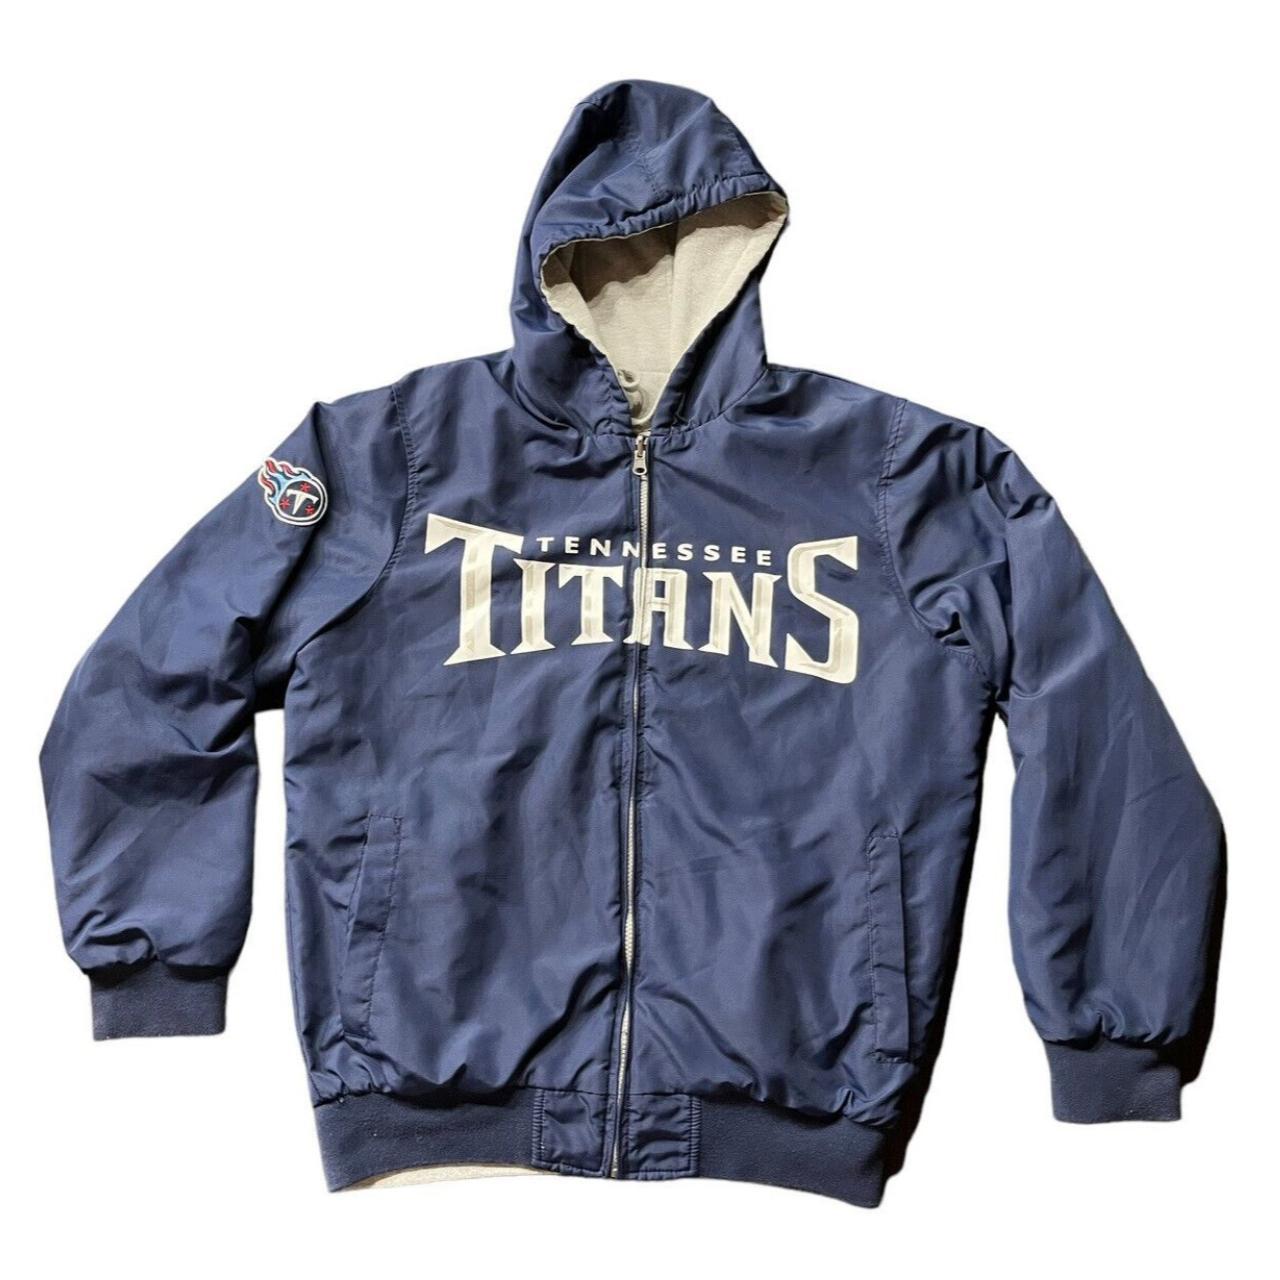 Tennessee Titans Size Medium NFL Zip Up Insulated - Depop